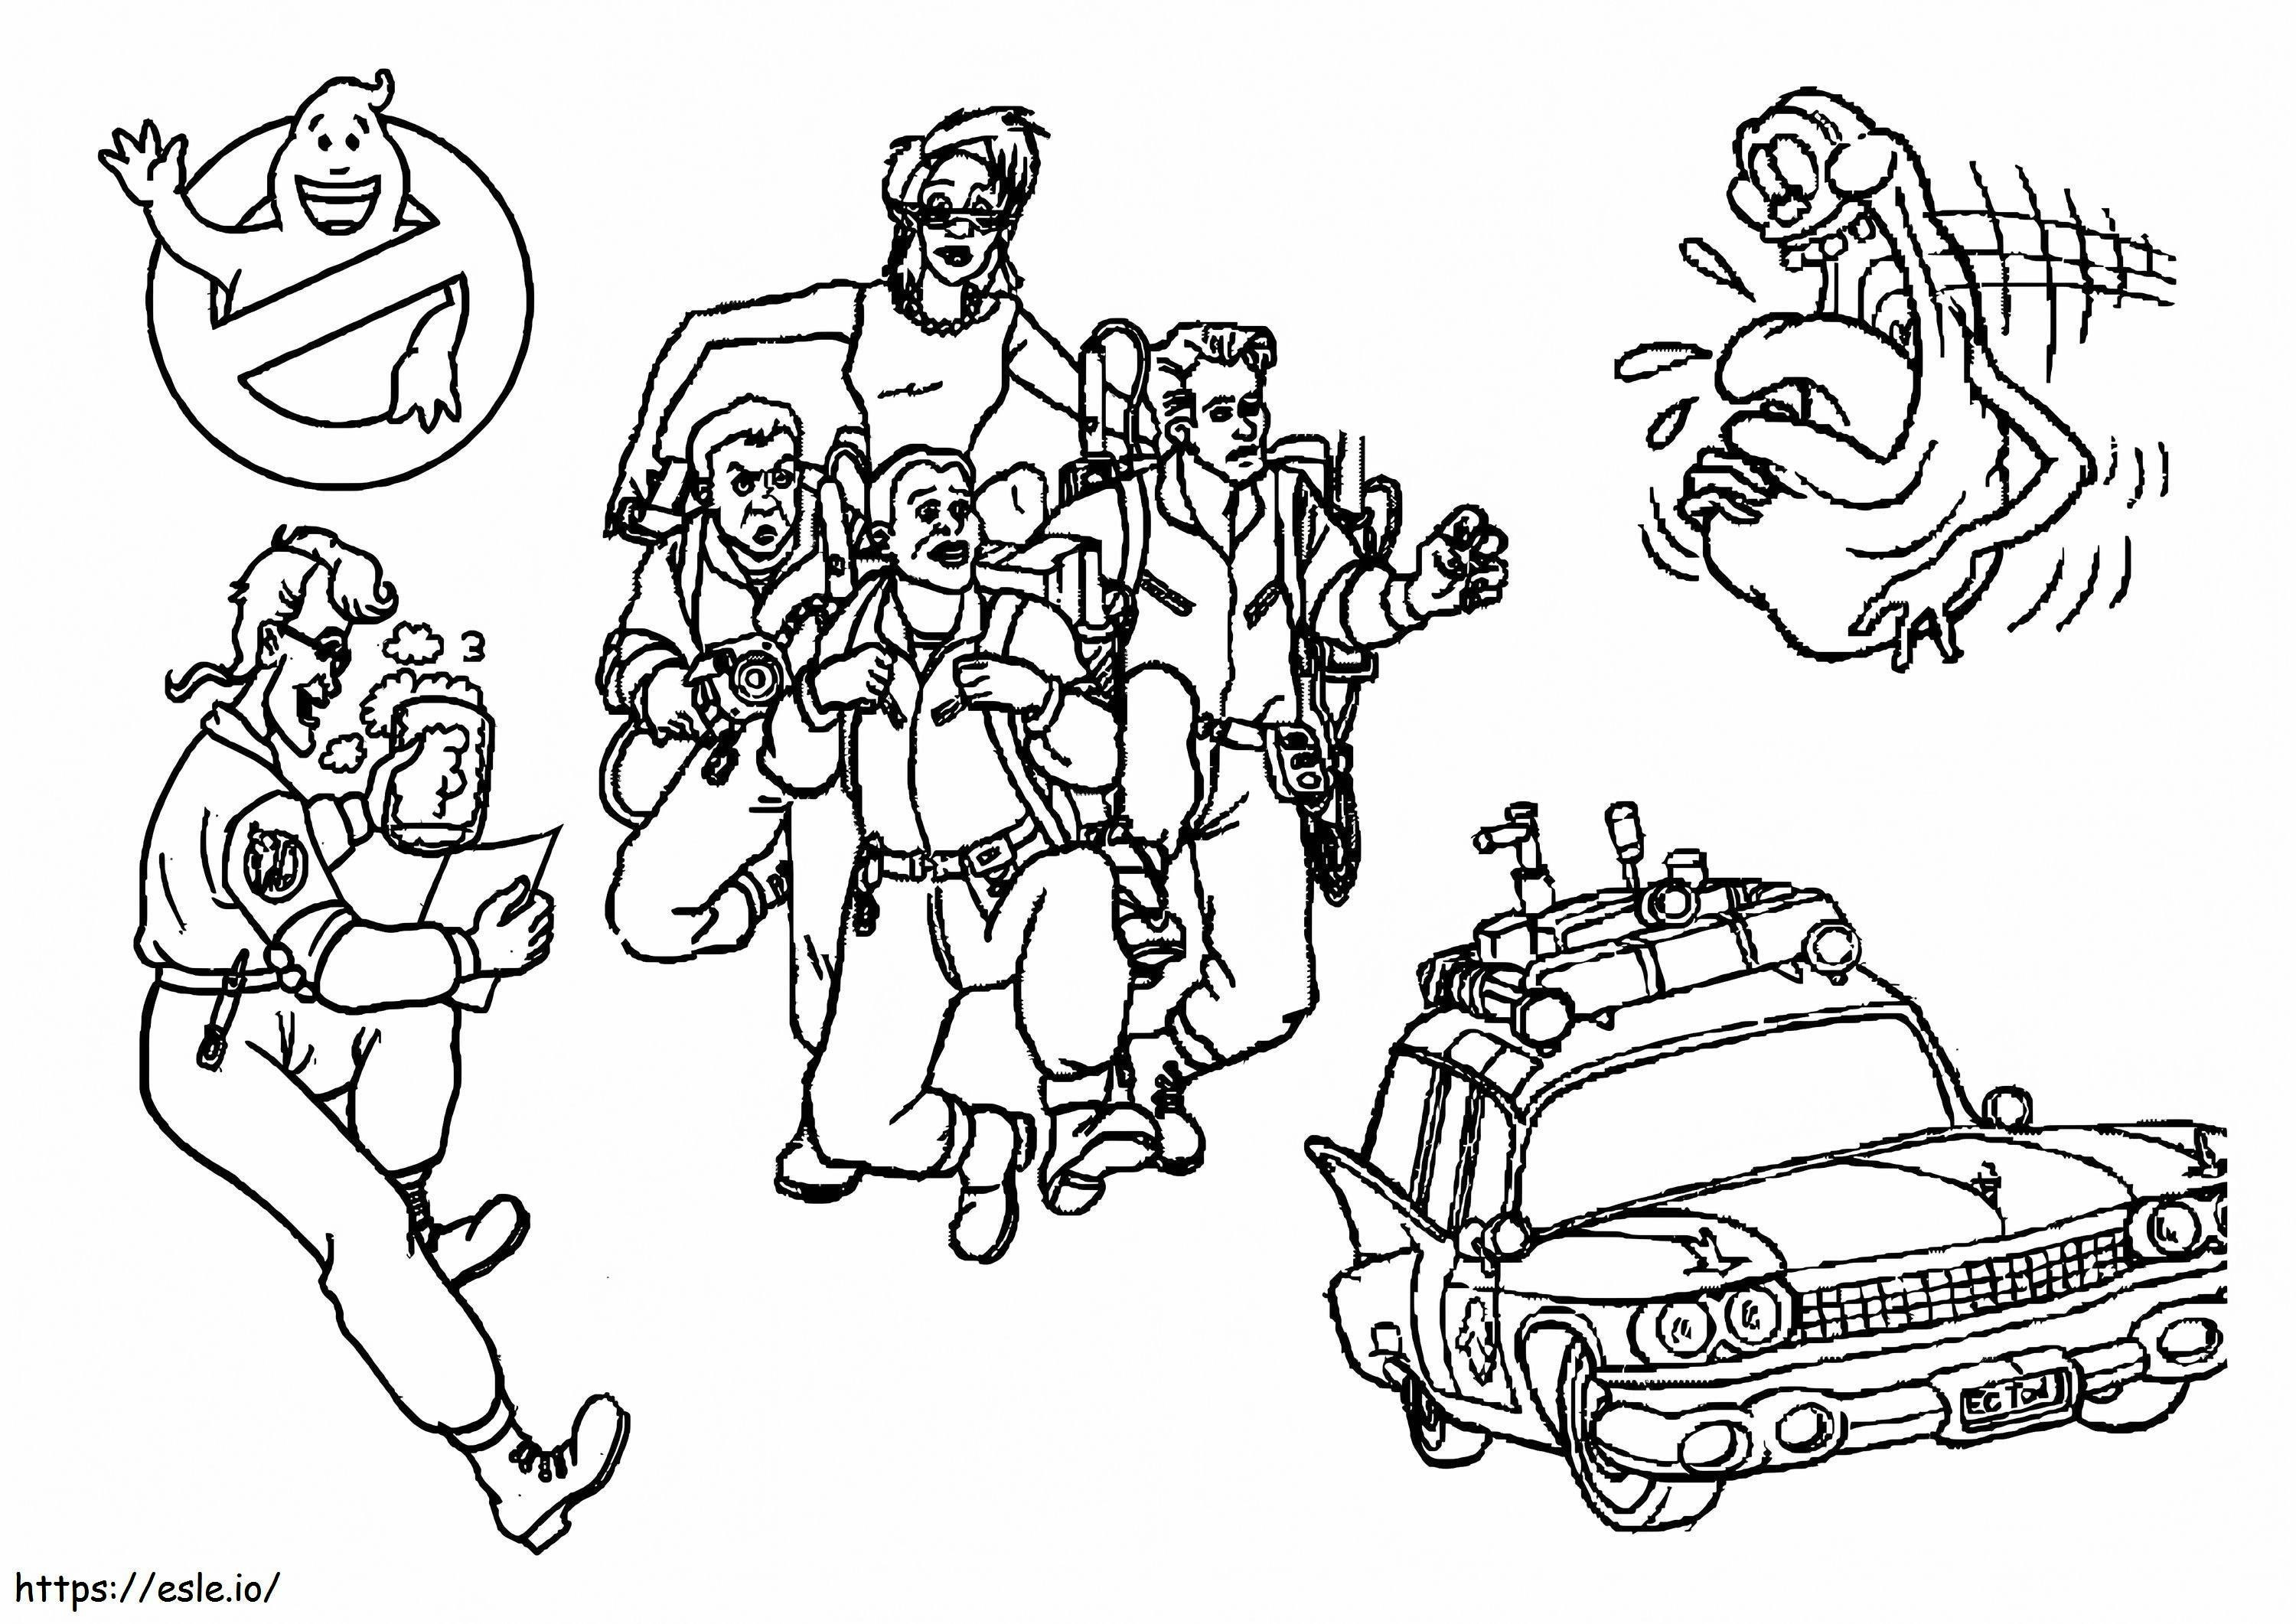 Draw All The Ghostbusters Characters coloring page